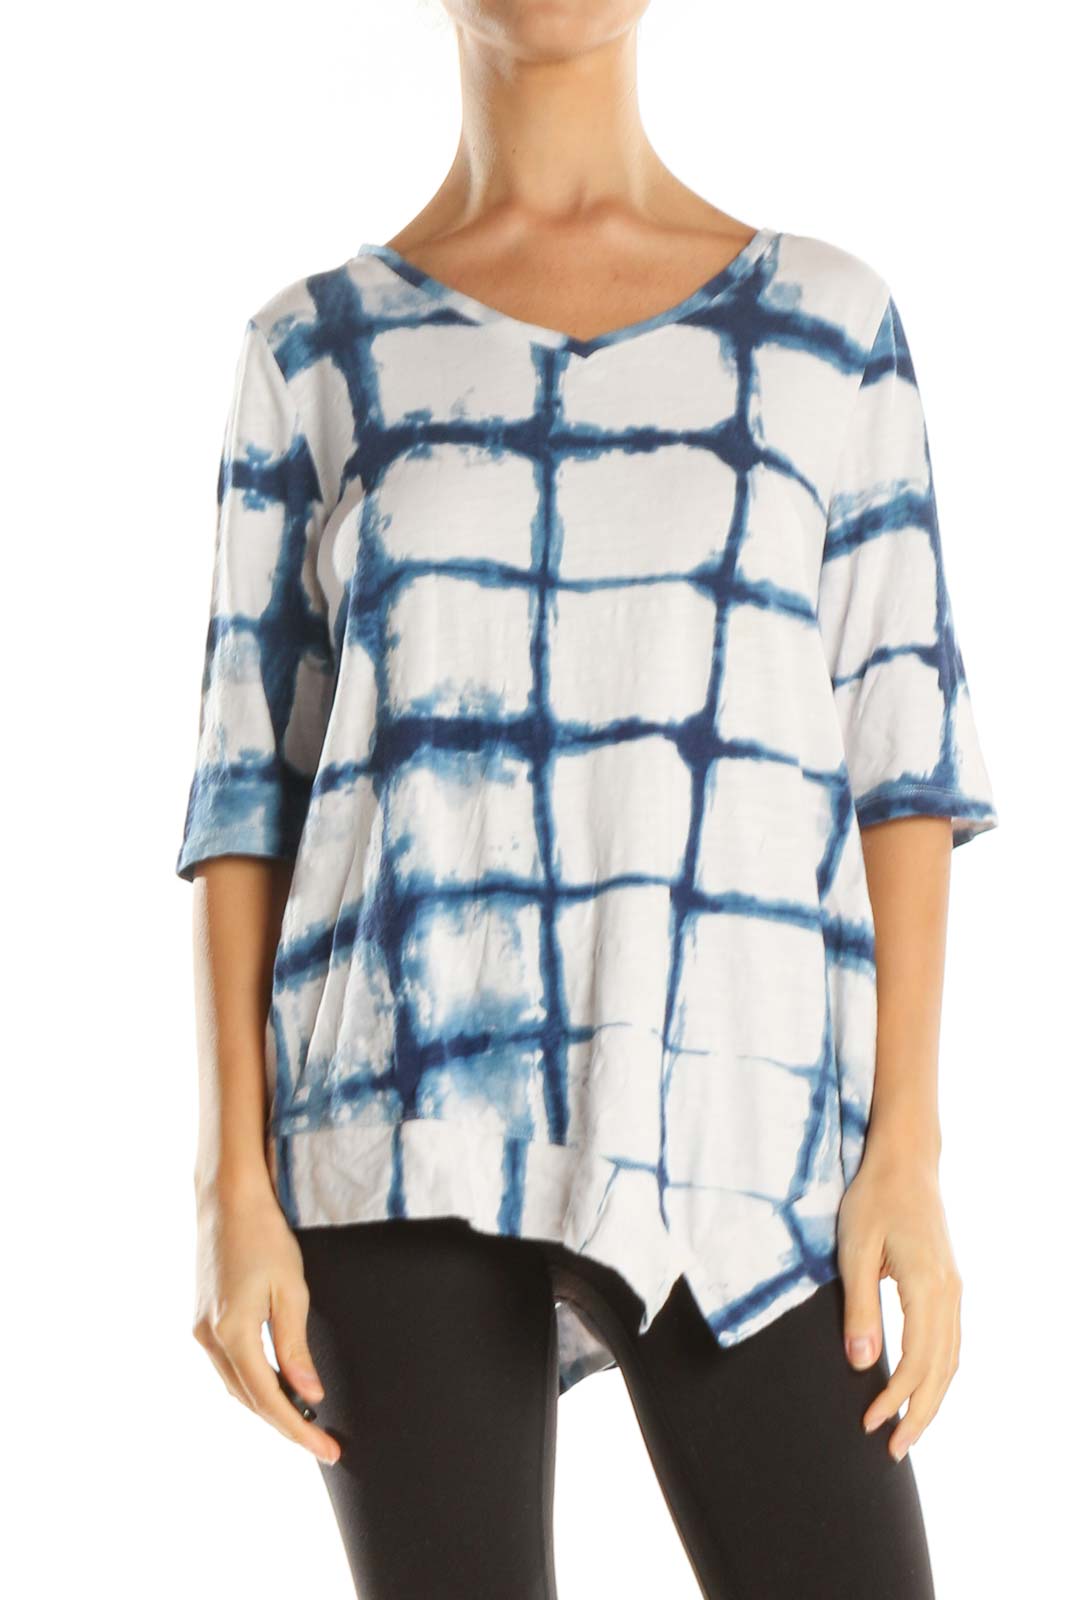 White Tie And Dye Brunch Blouse Front